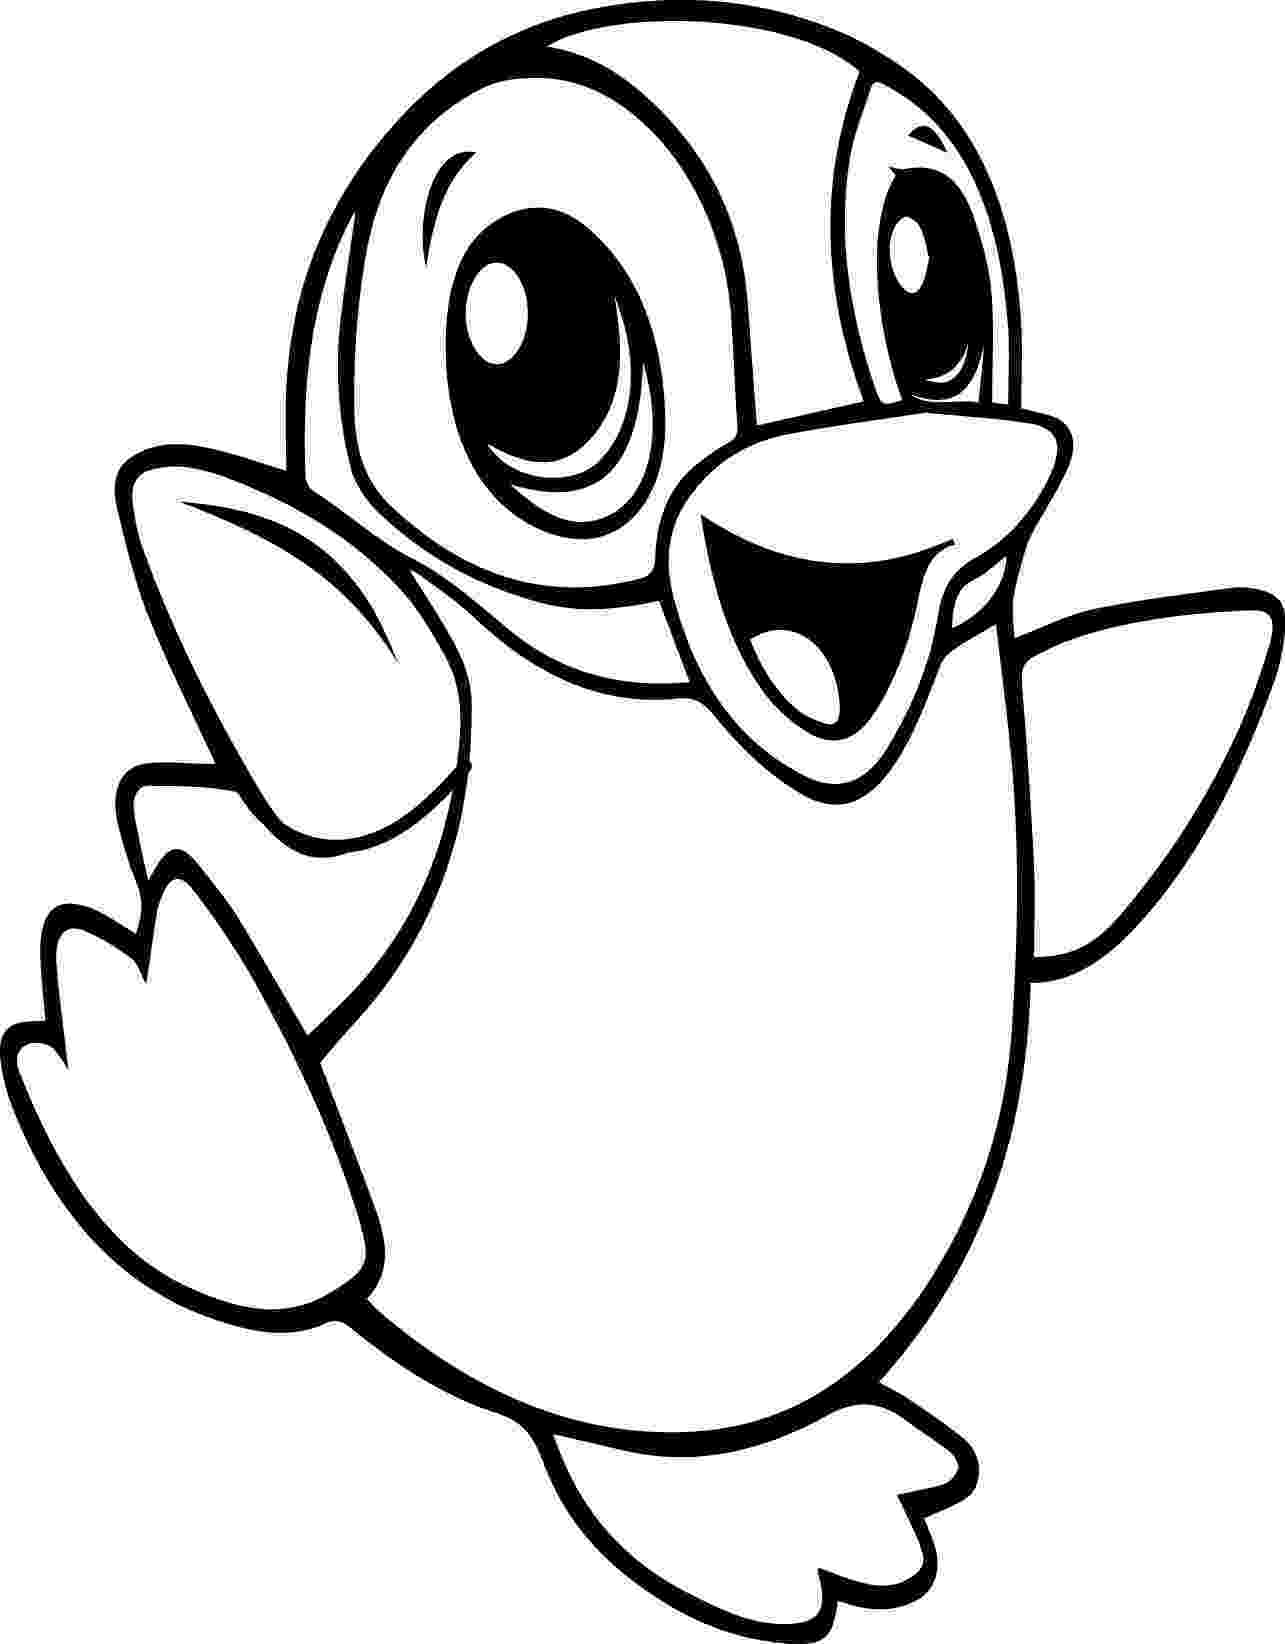 penguin images to color 8 cartoon coloring pages jpg ai illustrator download penguin to color images 